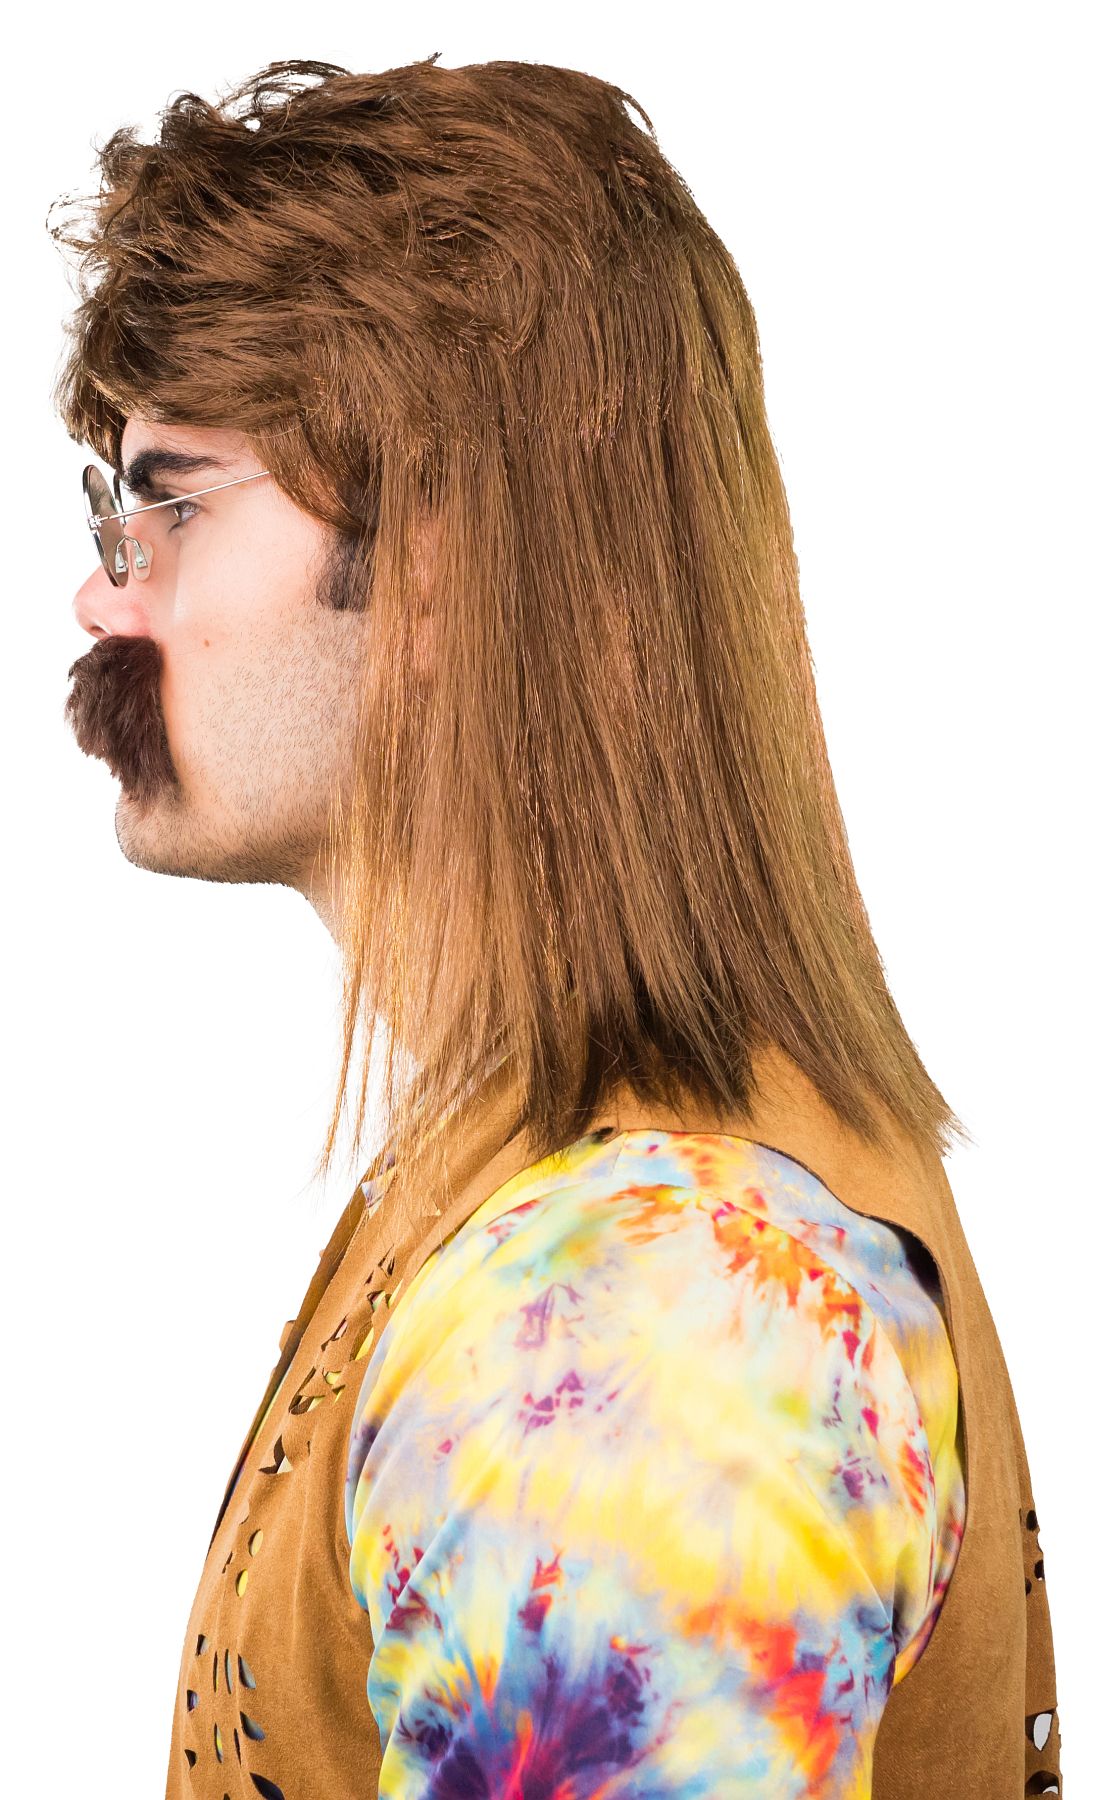 80s man wig long with mustache